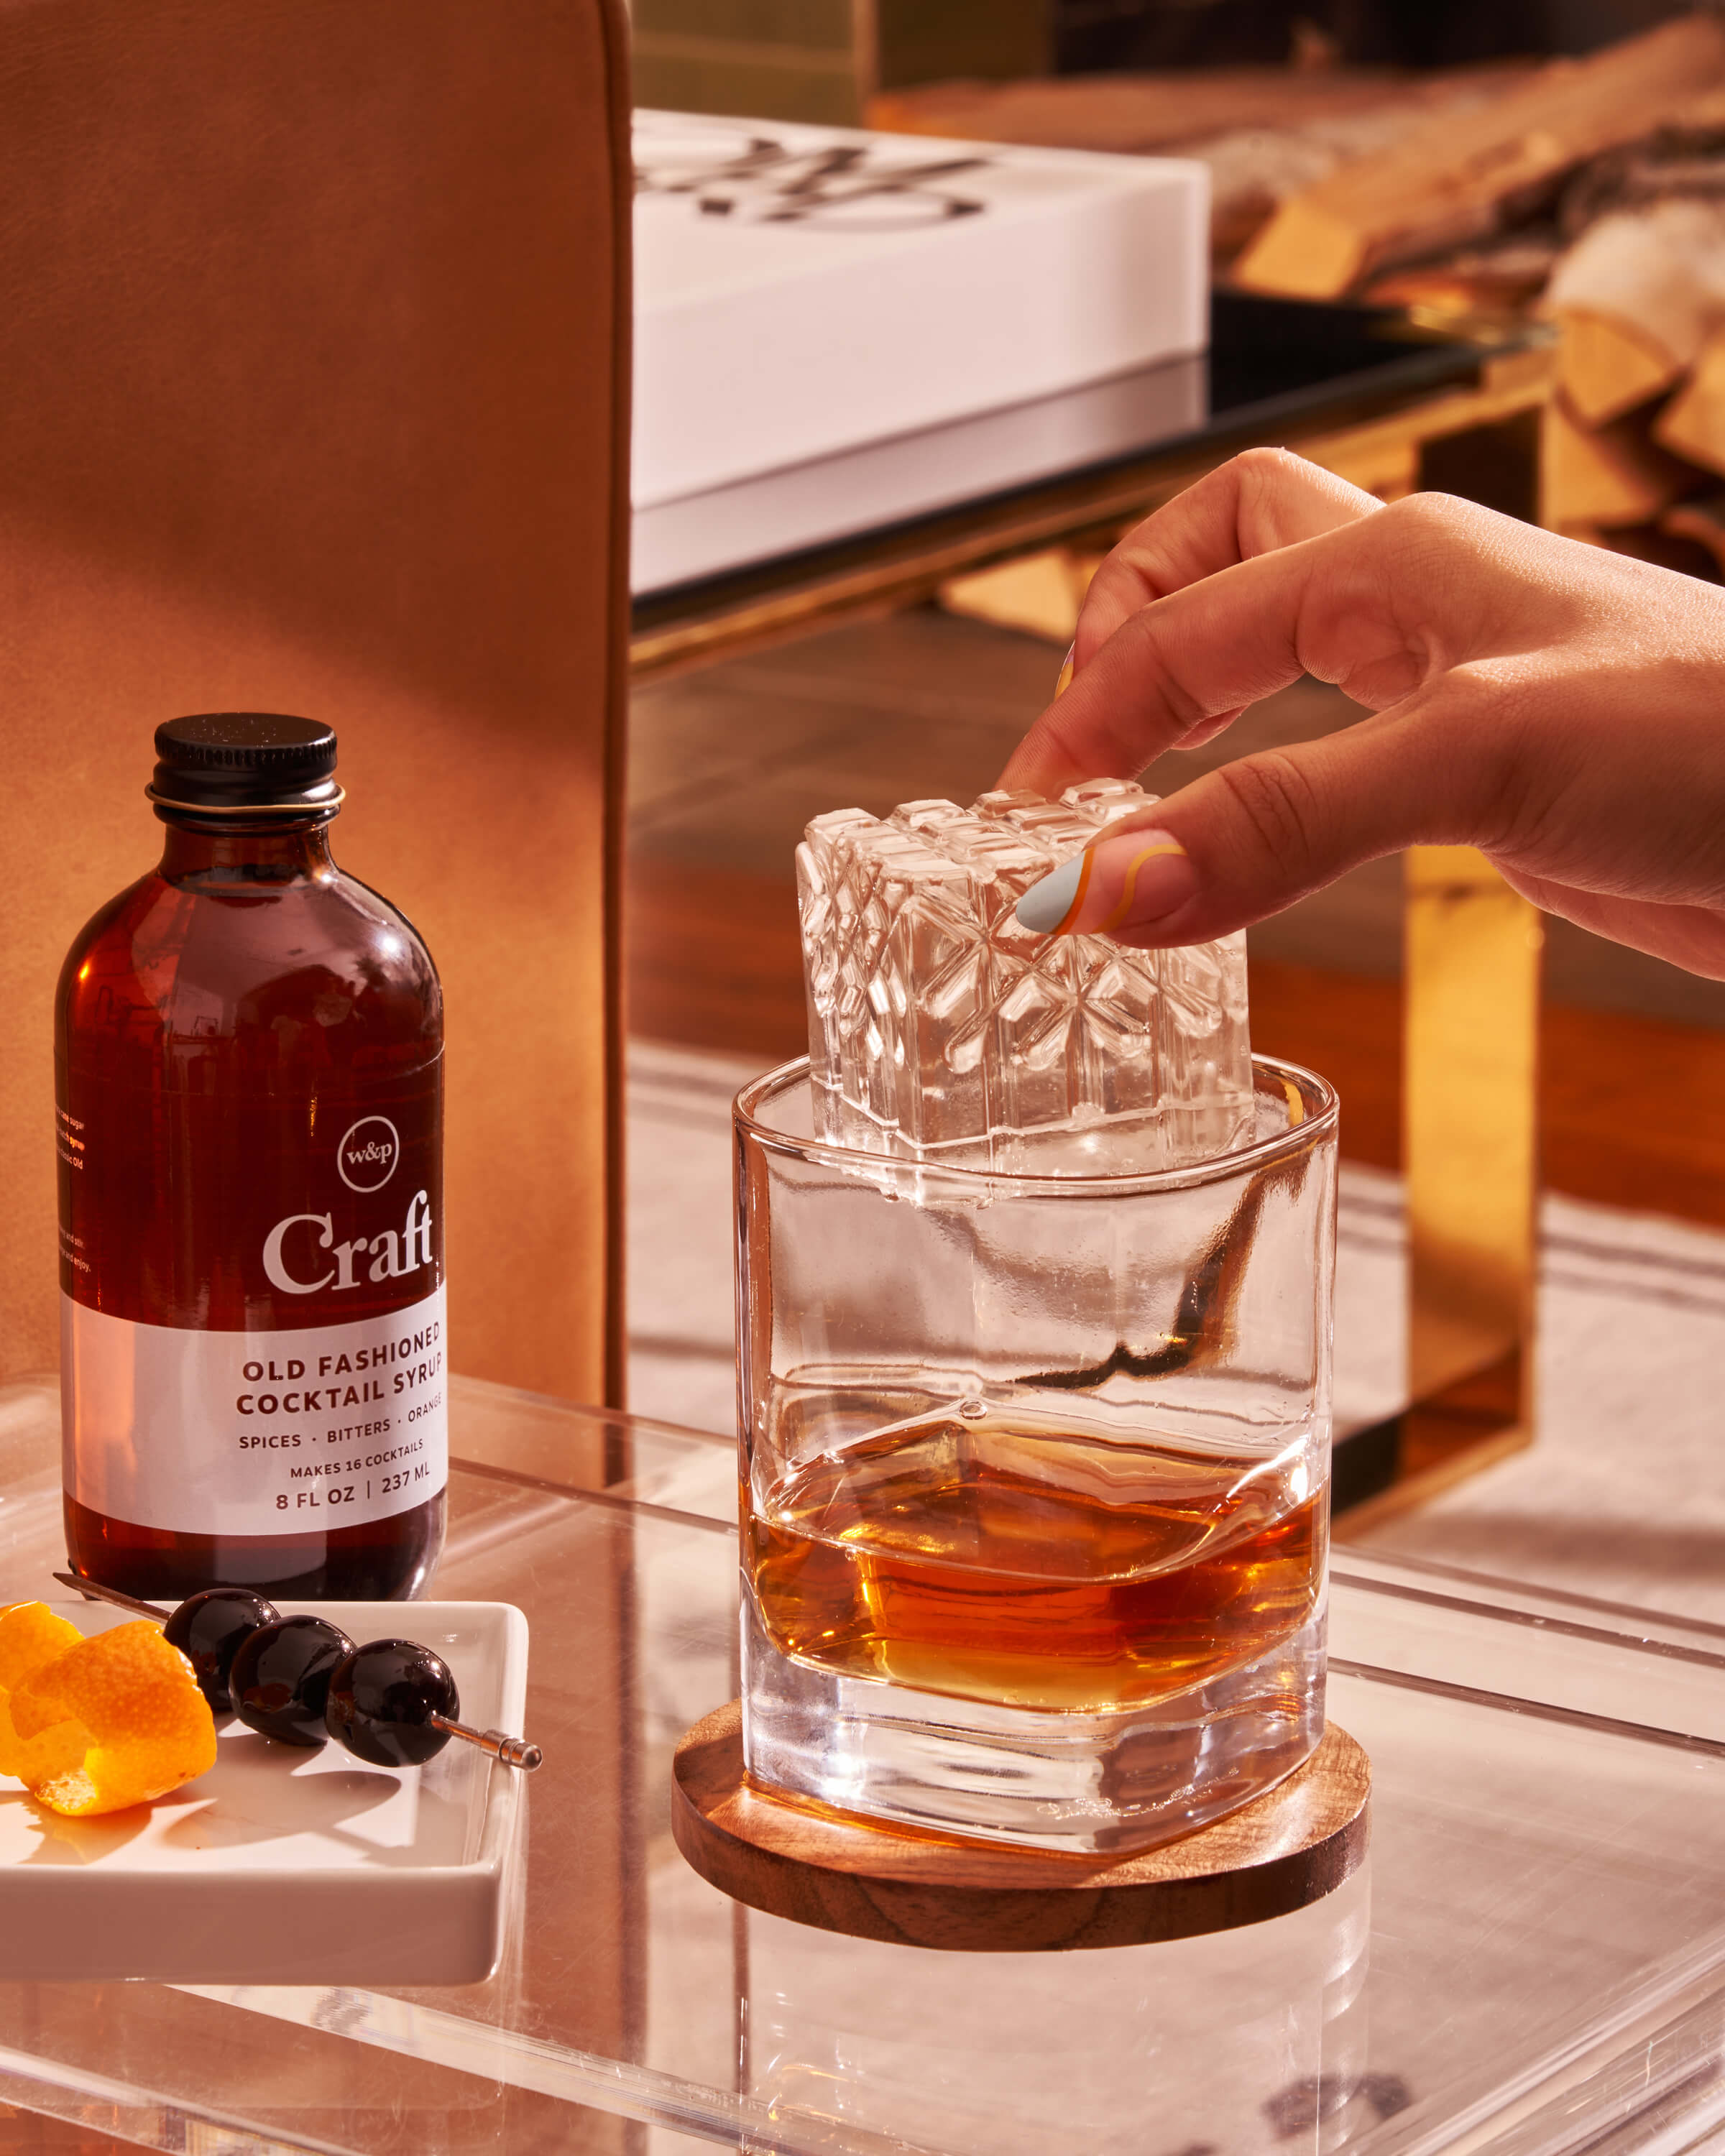 These Personalized Ice Cube Trays Are the Perfect Gift for